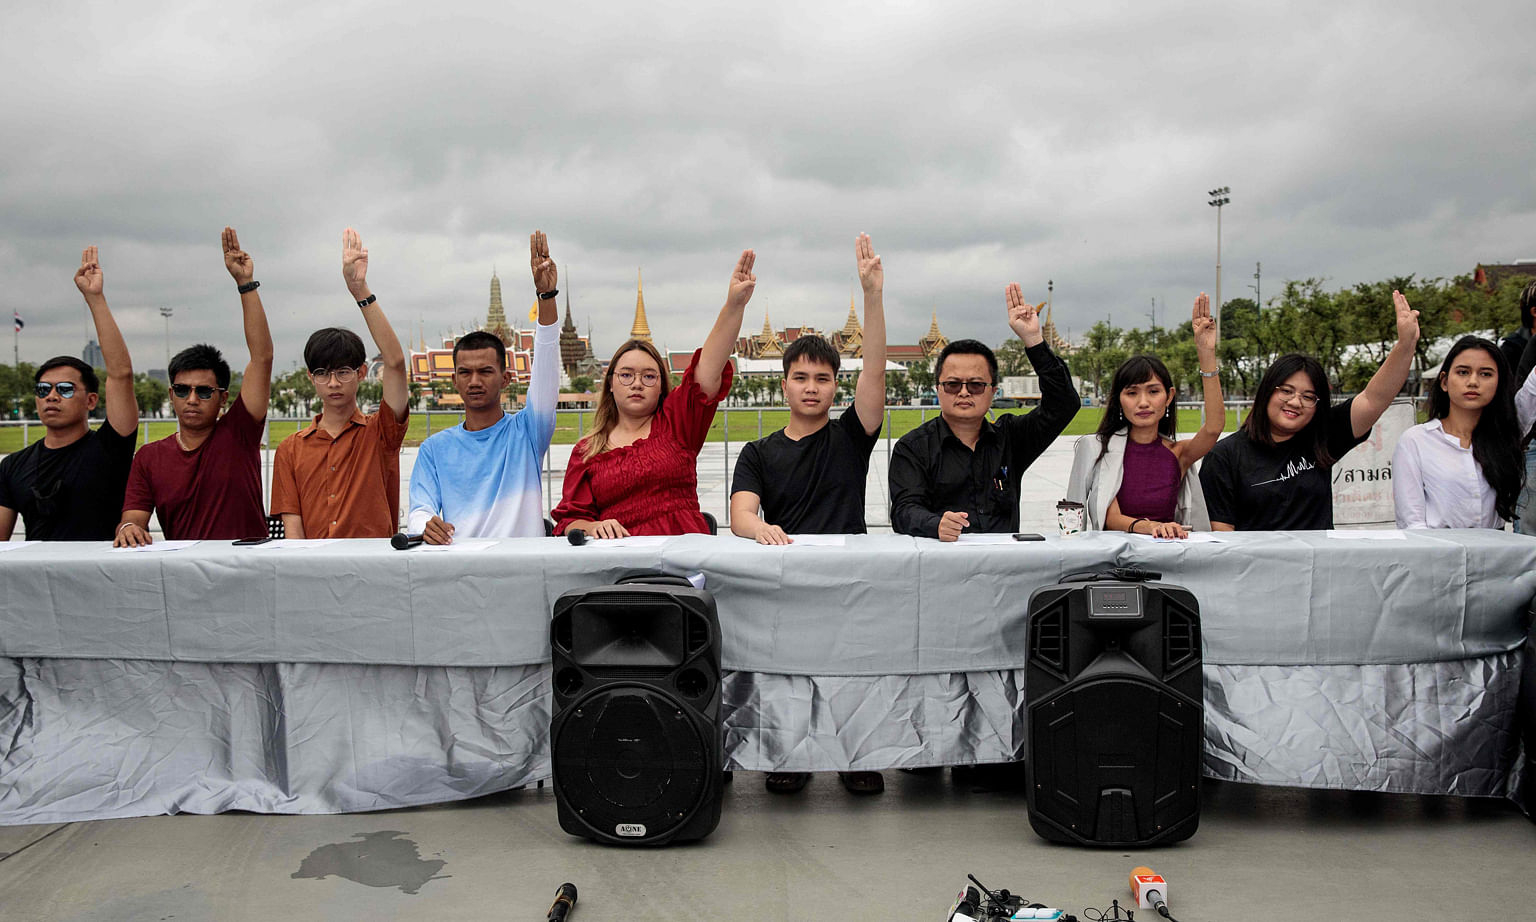 Thai pro-democracy leaders making a three-finger salute as a general symbol against dictatorship, at a press conference across from the Grand Palace in Bangkok yesterday, ahead of a planned rally next week.